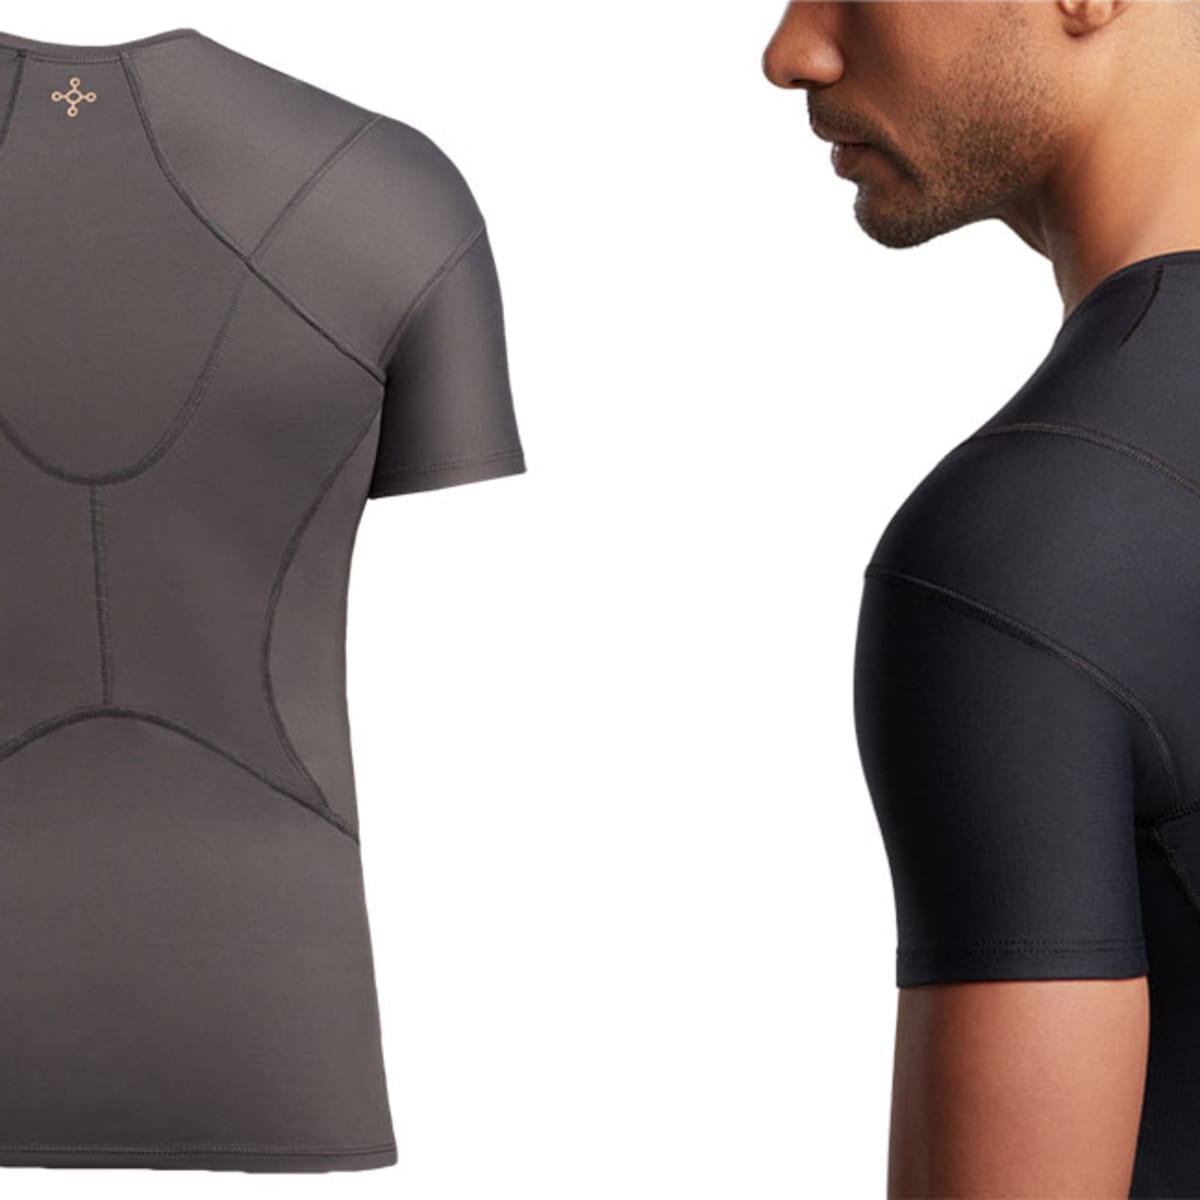 Keep Your Upper Body Supported With This Shoulder Support Shirt